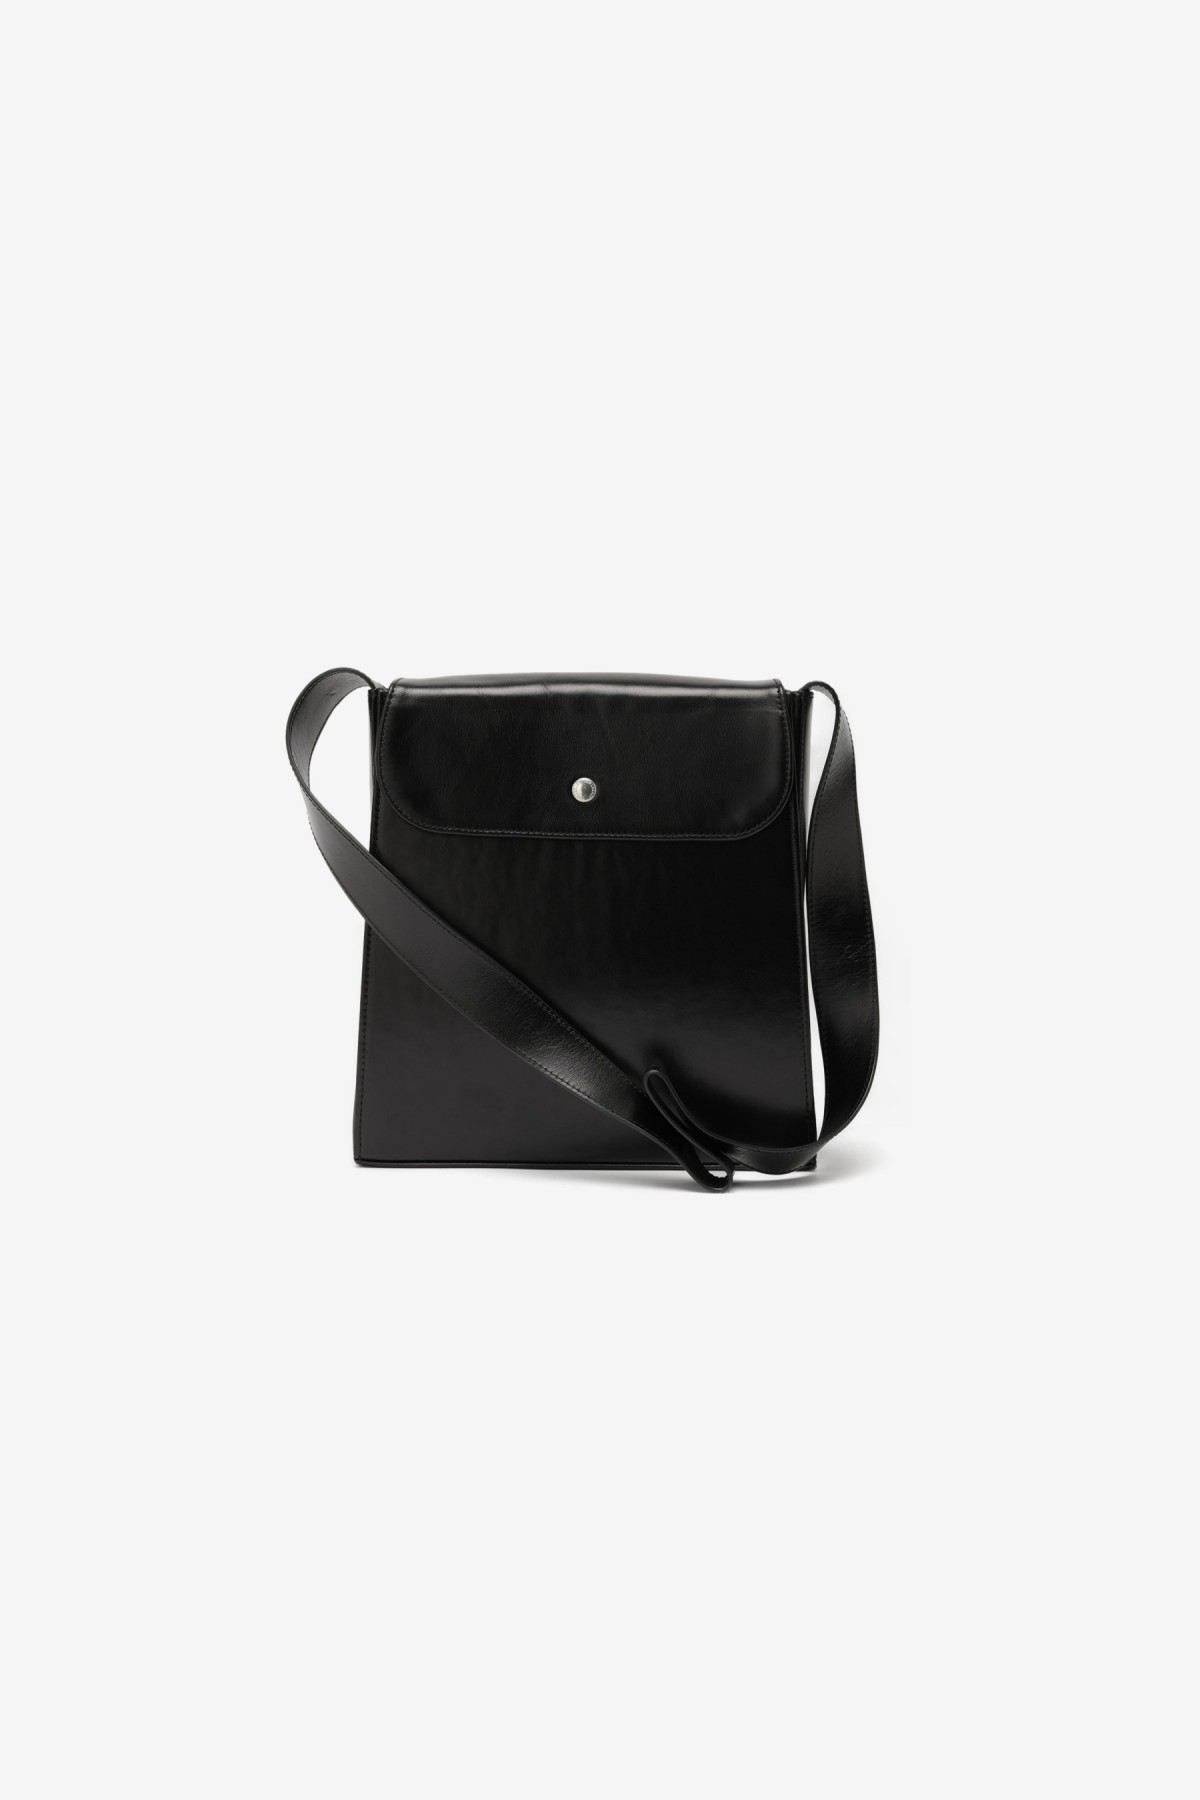 Our Legacy Extended Bag in Aamon Black Leather